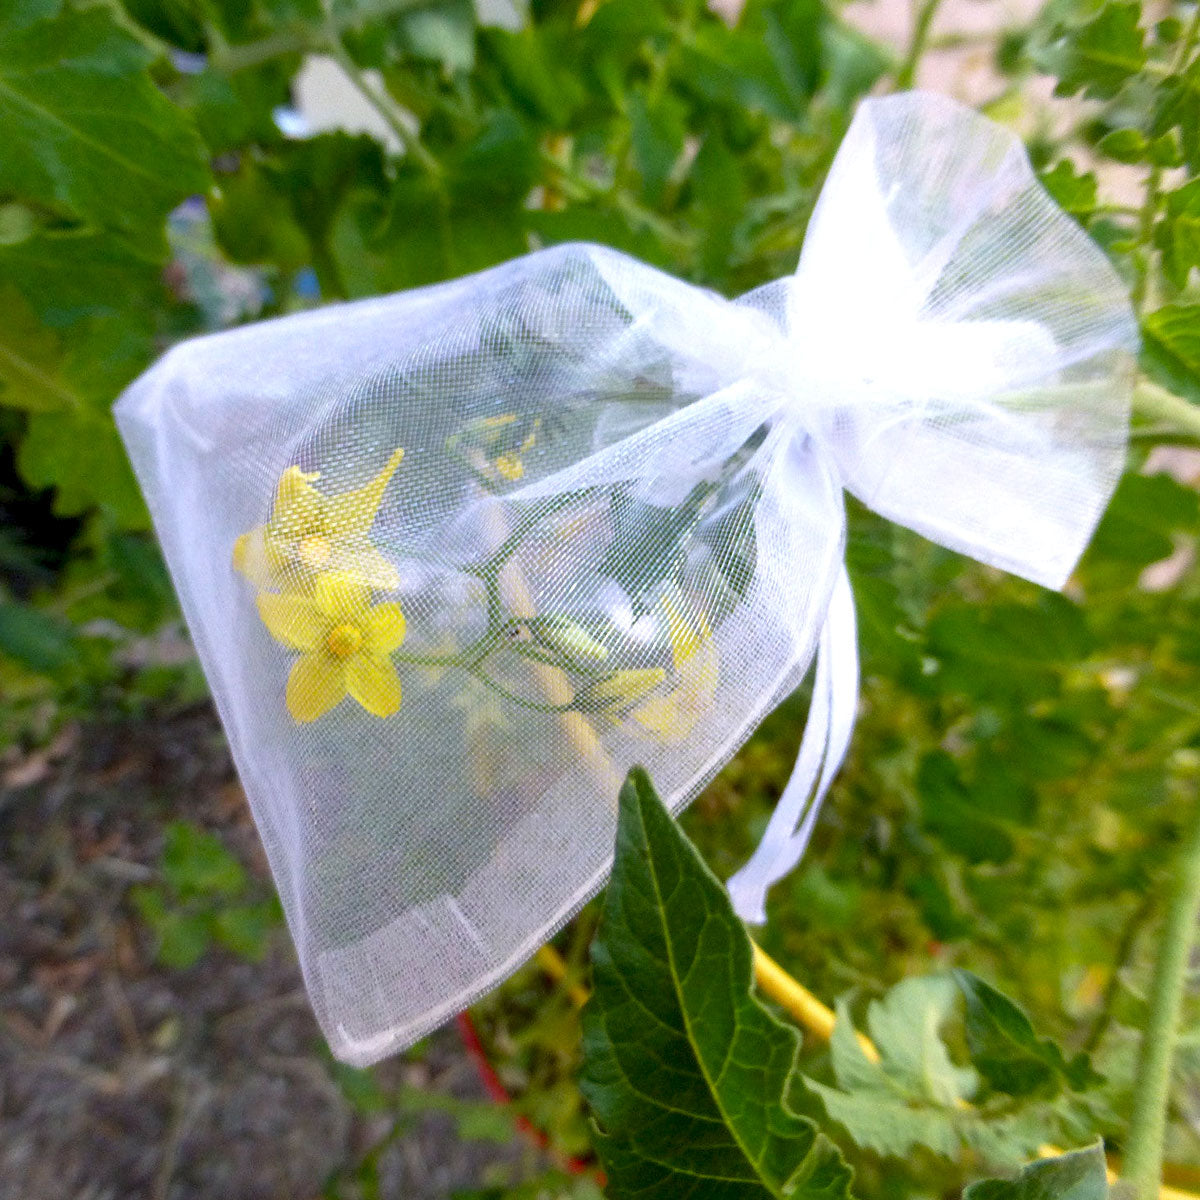 Blossom bags are placed over the blossoms to prevent cross-pollination with other plants